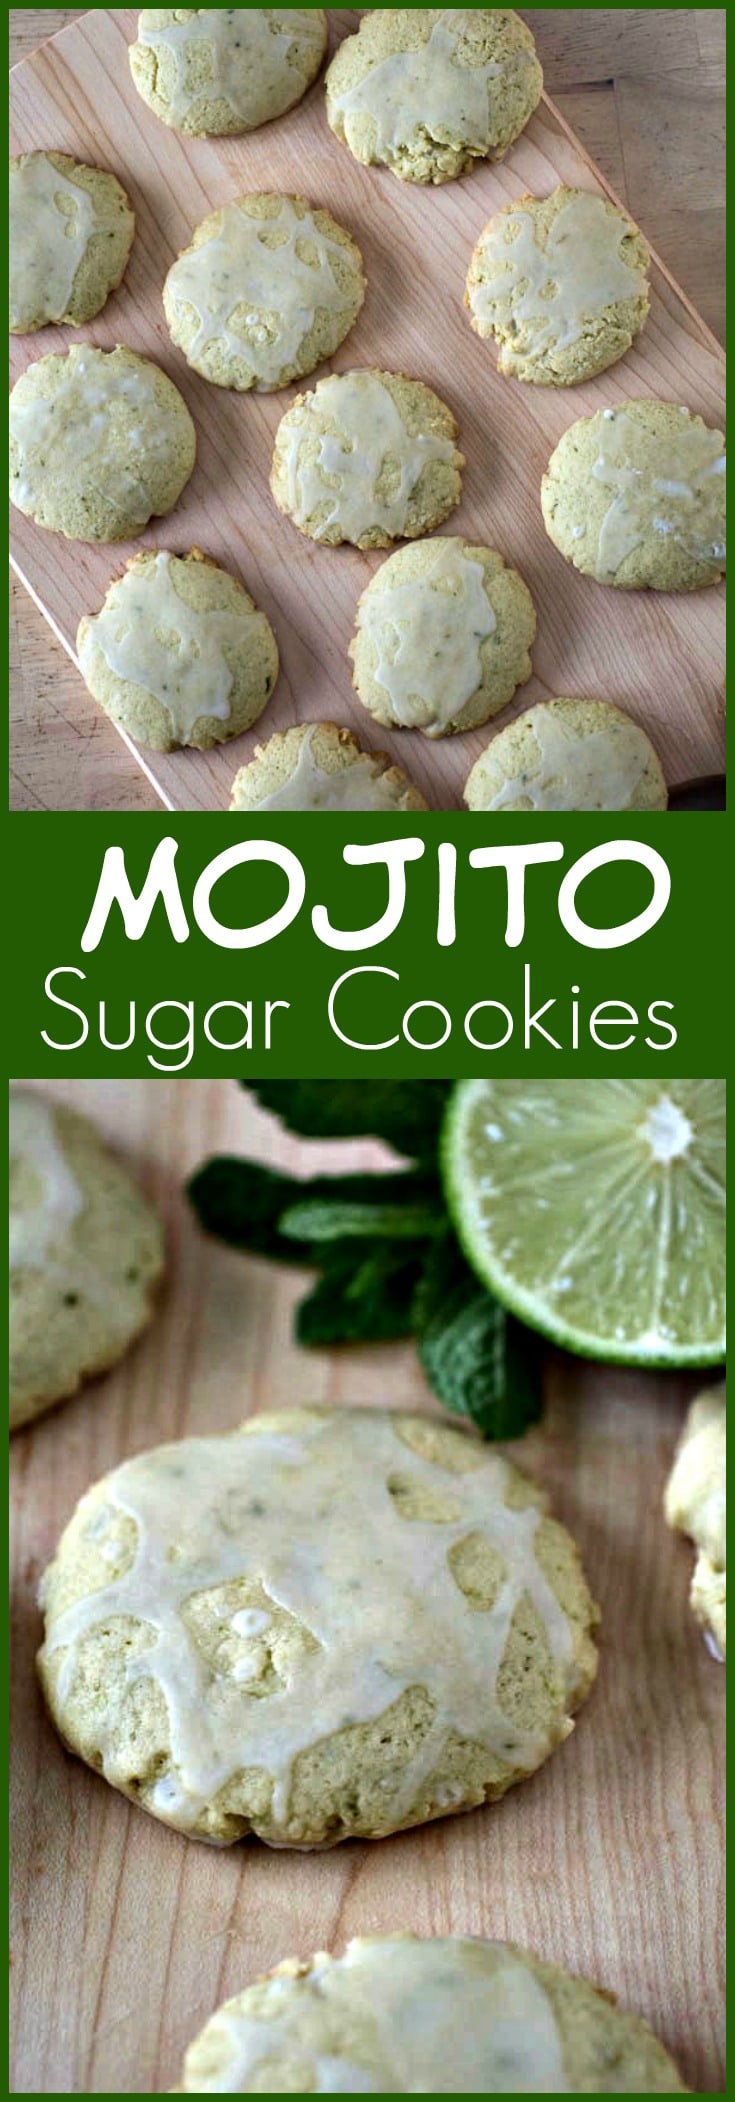 These Mojito Sugar Cookies are a refreshing lime and mint sugar cookie drizzled with a rum glaze for a hint of the tropics.